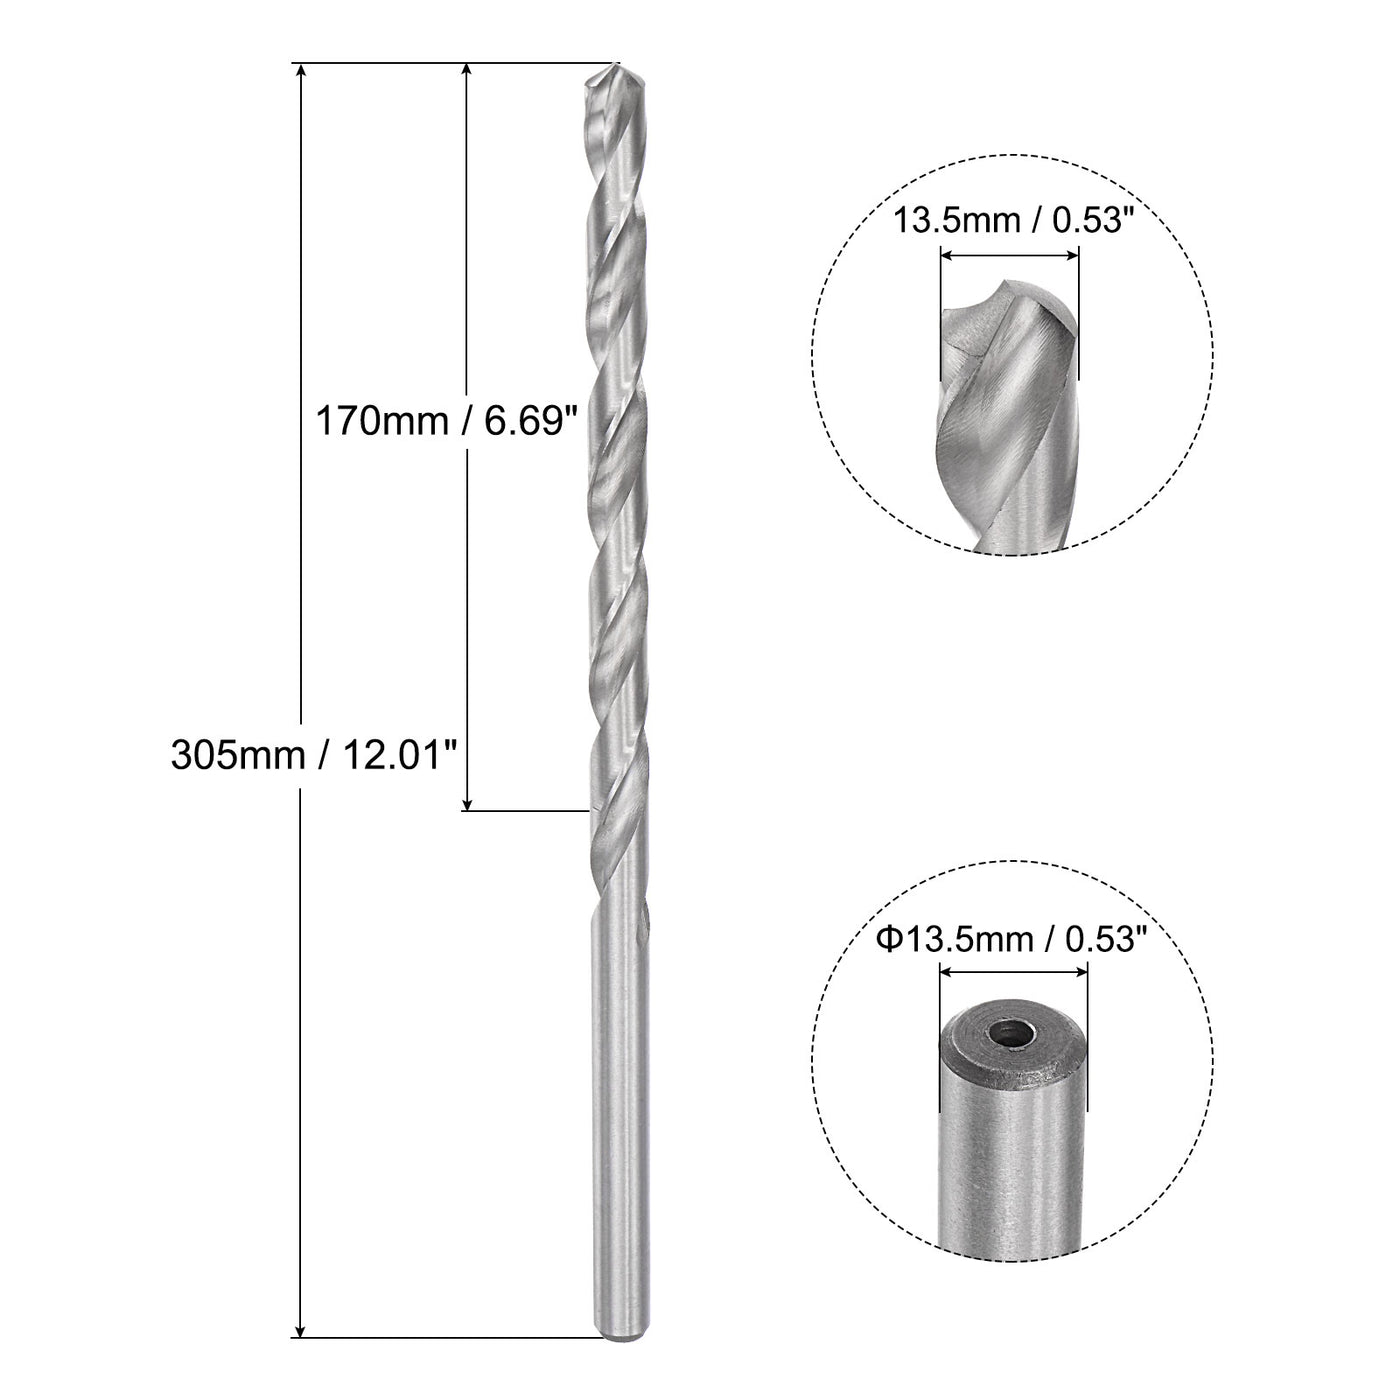 uxcell Uxcell 13.5mm Twist Drill Bits, High-Speed Steel Extra Long Drill Bit 305mm Length